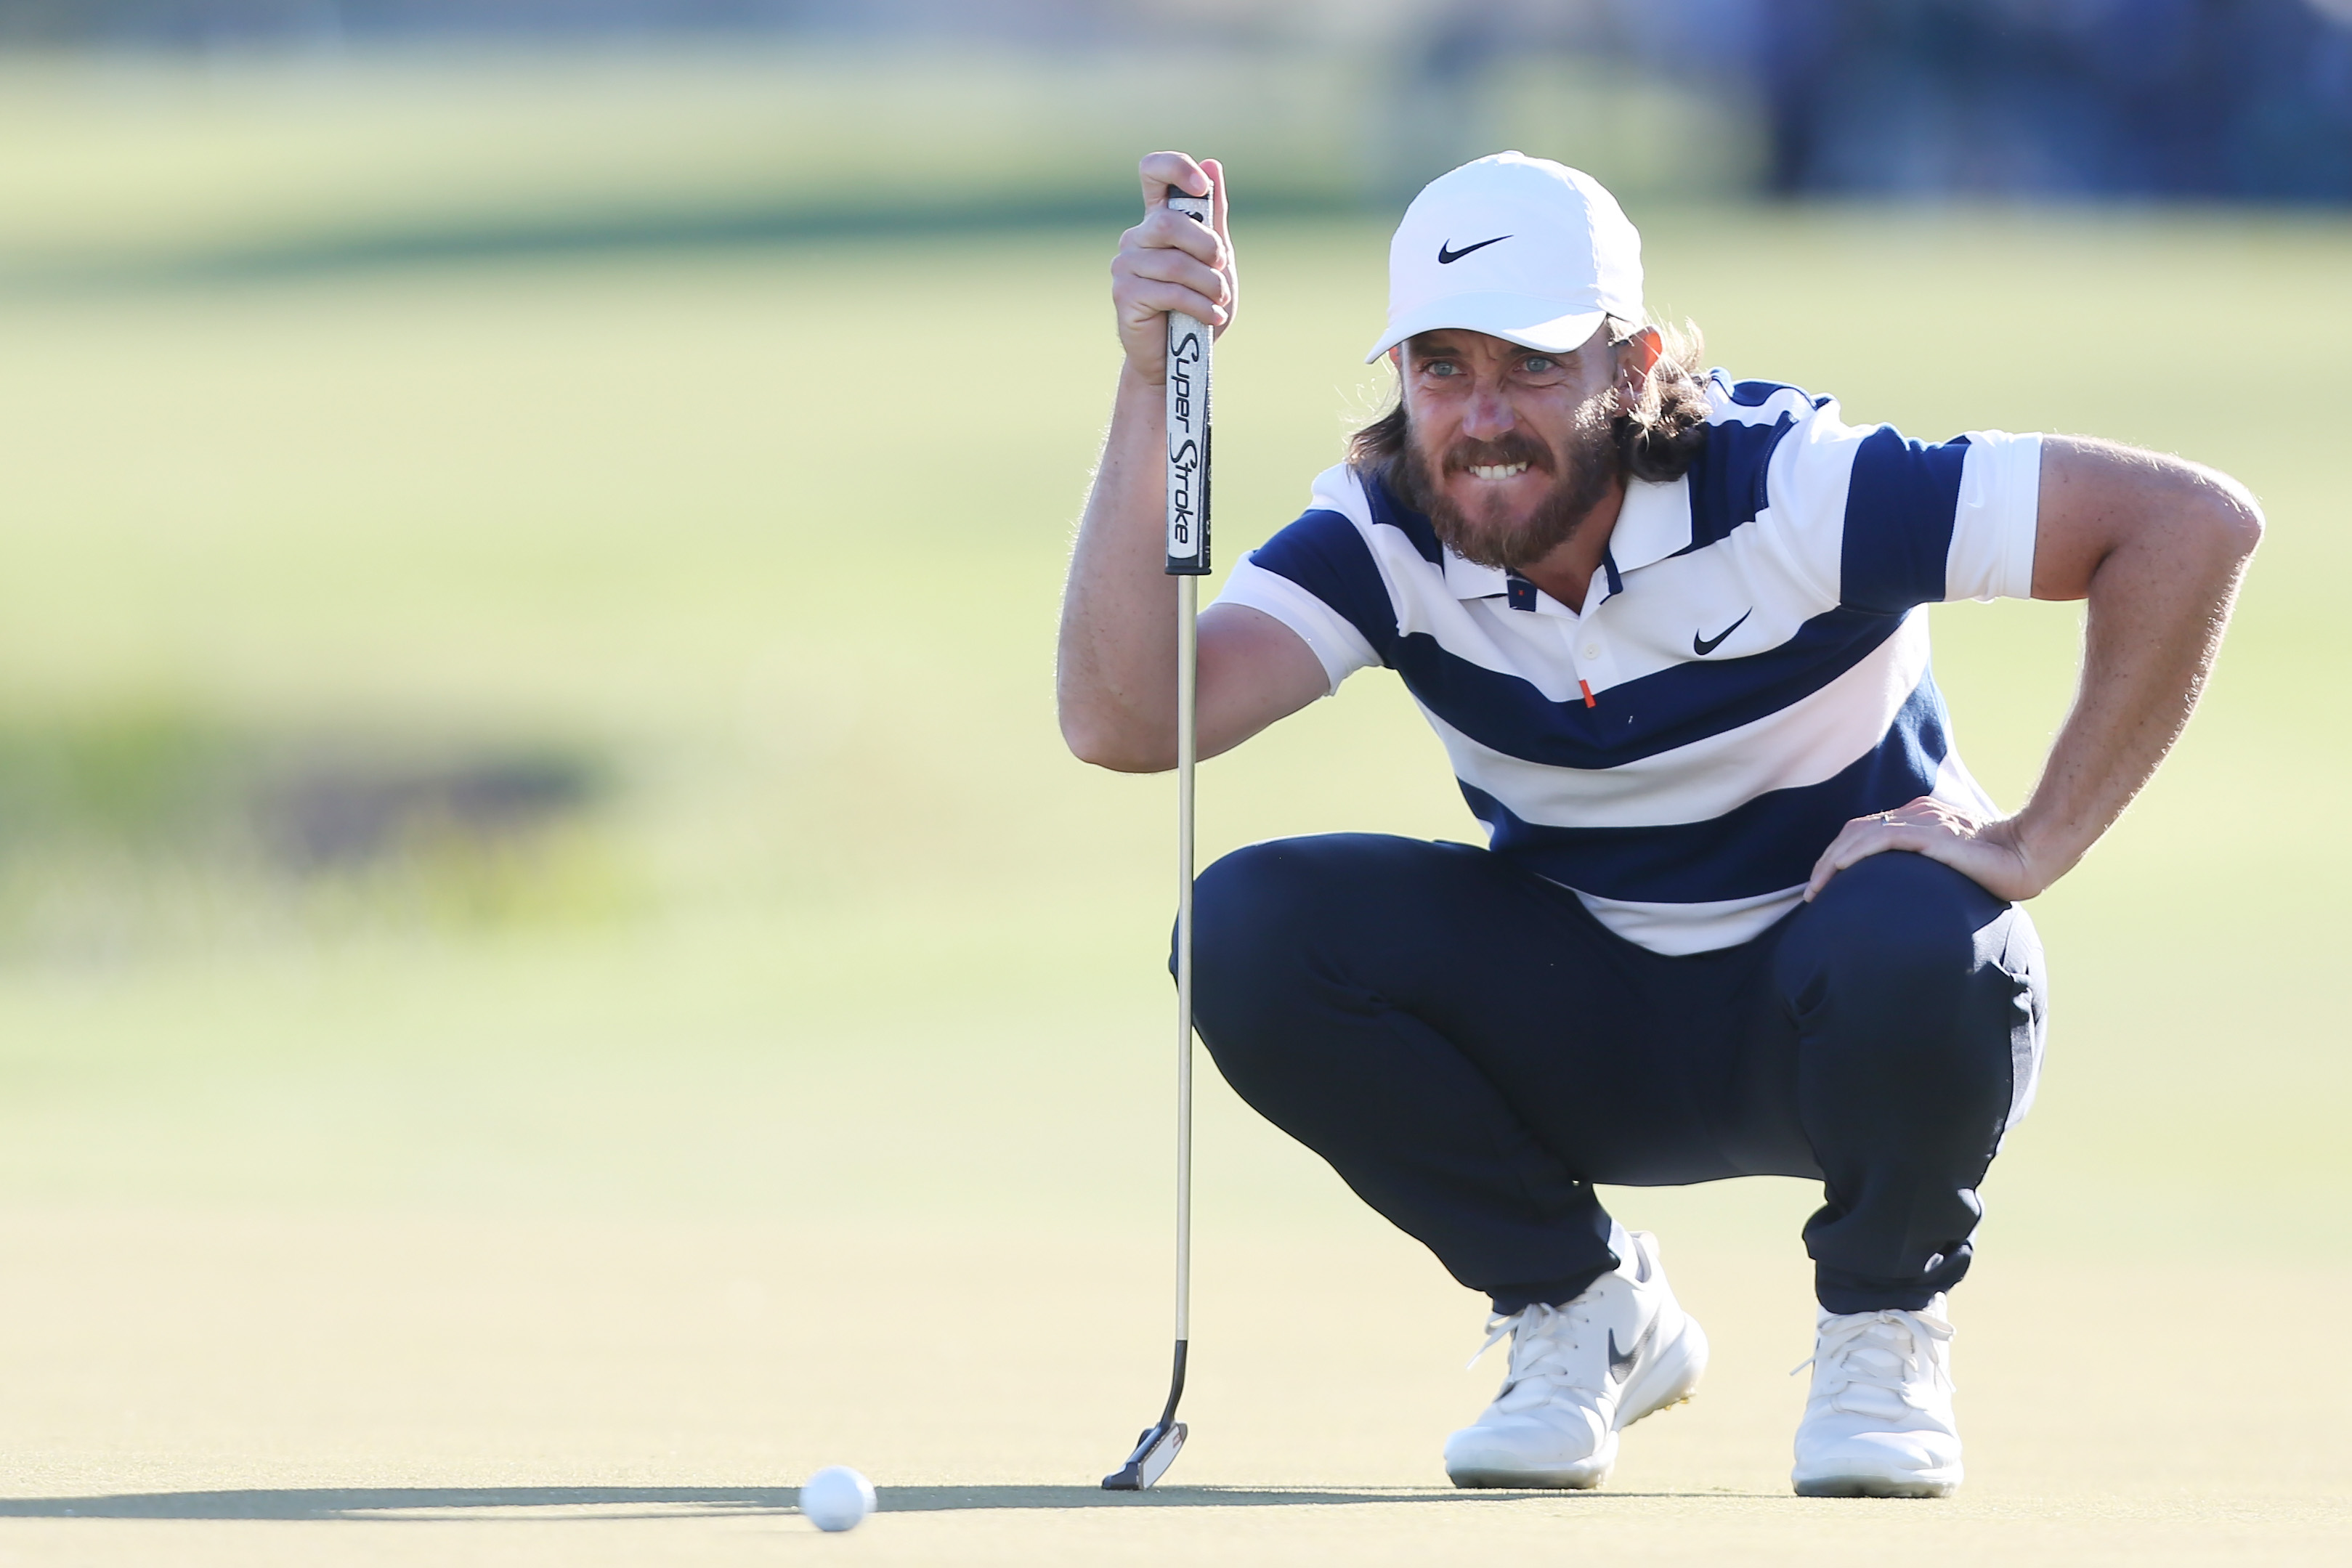 Five-time European Tour winner Tommy Fleetwood closing in on his biggest  victory yet | Golf News and Tour Information | Golf Digest